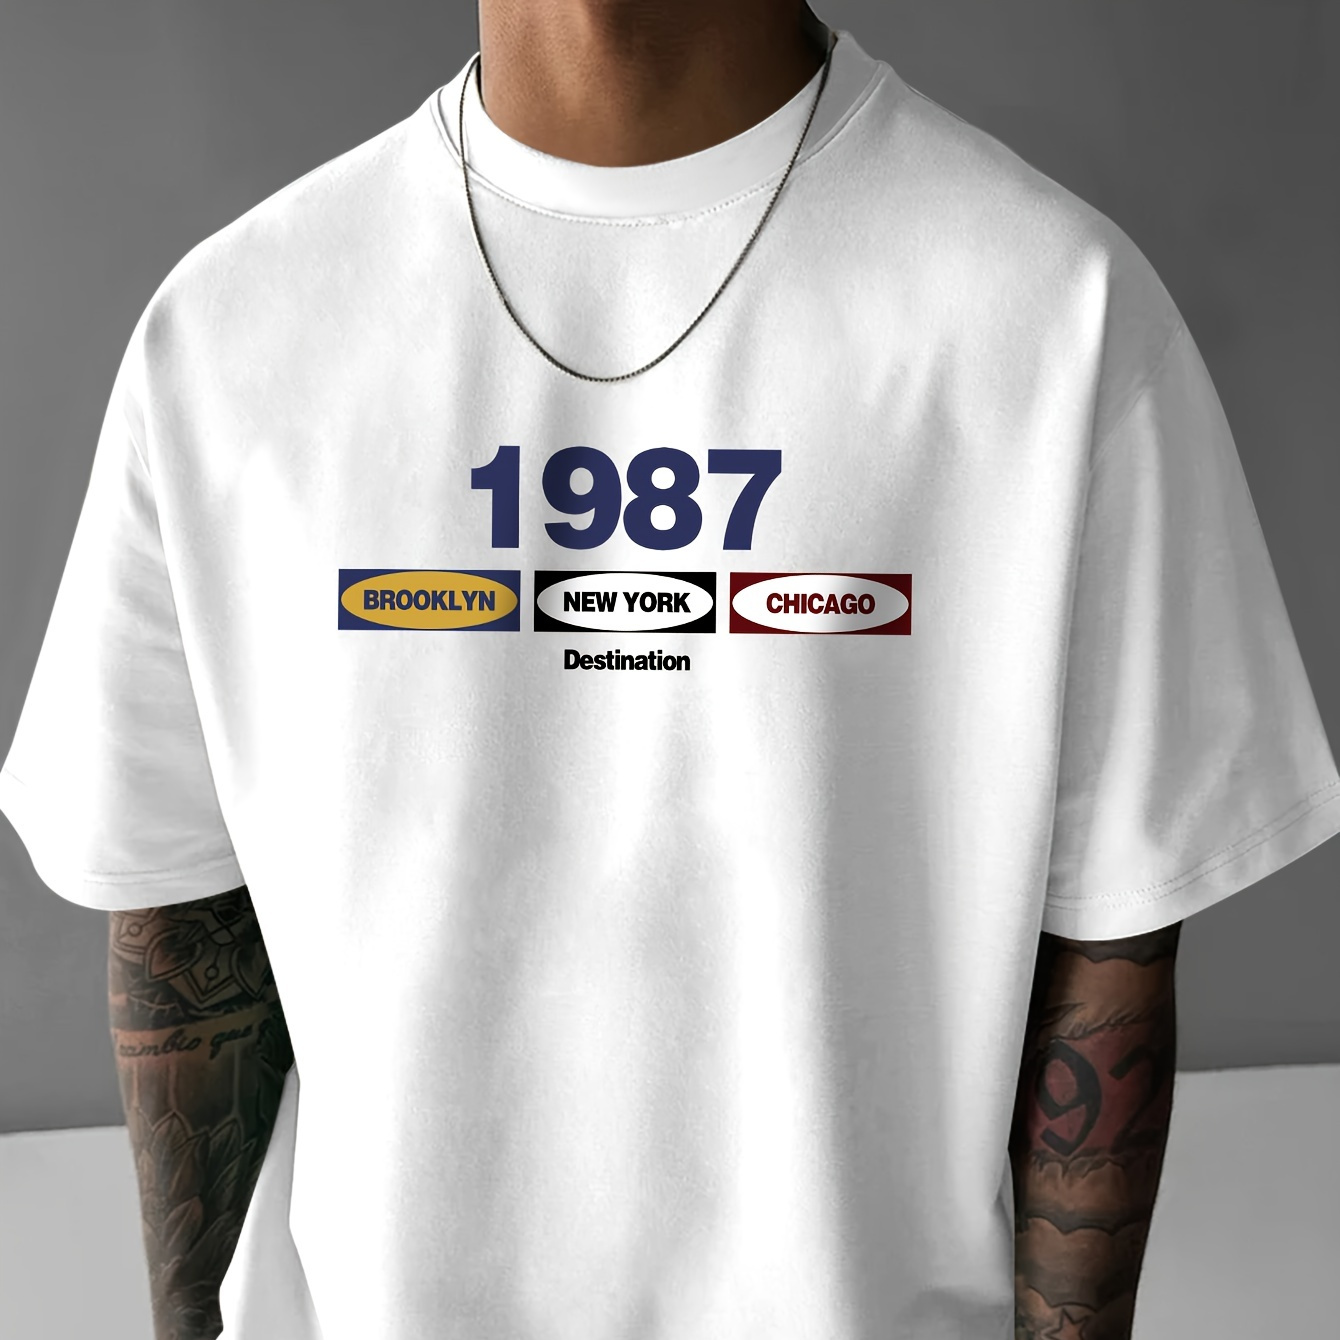 

1987 Retro New York Printed, Men's Casual Trendy Fashion Crew Neck T-shirt For Summer And Spring